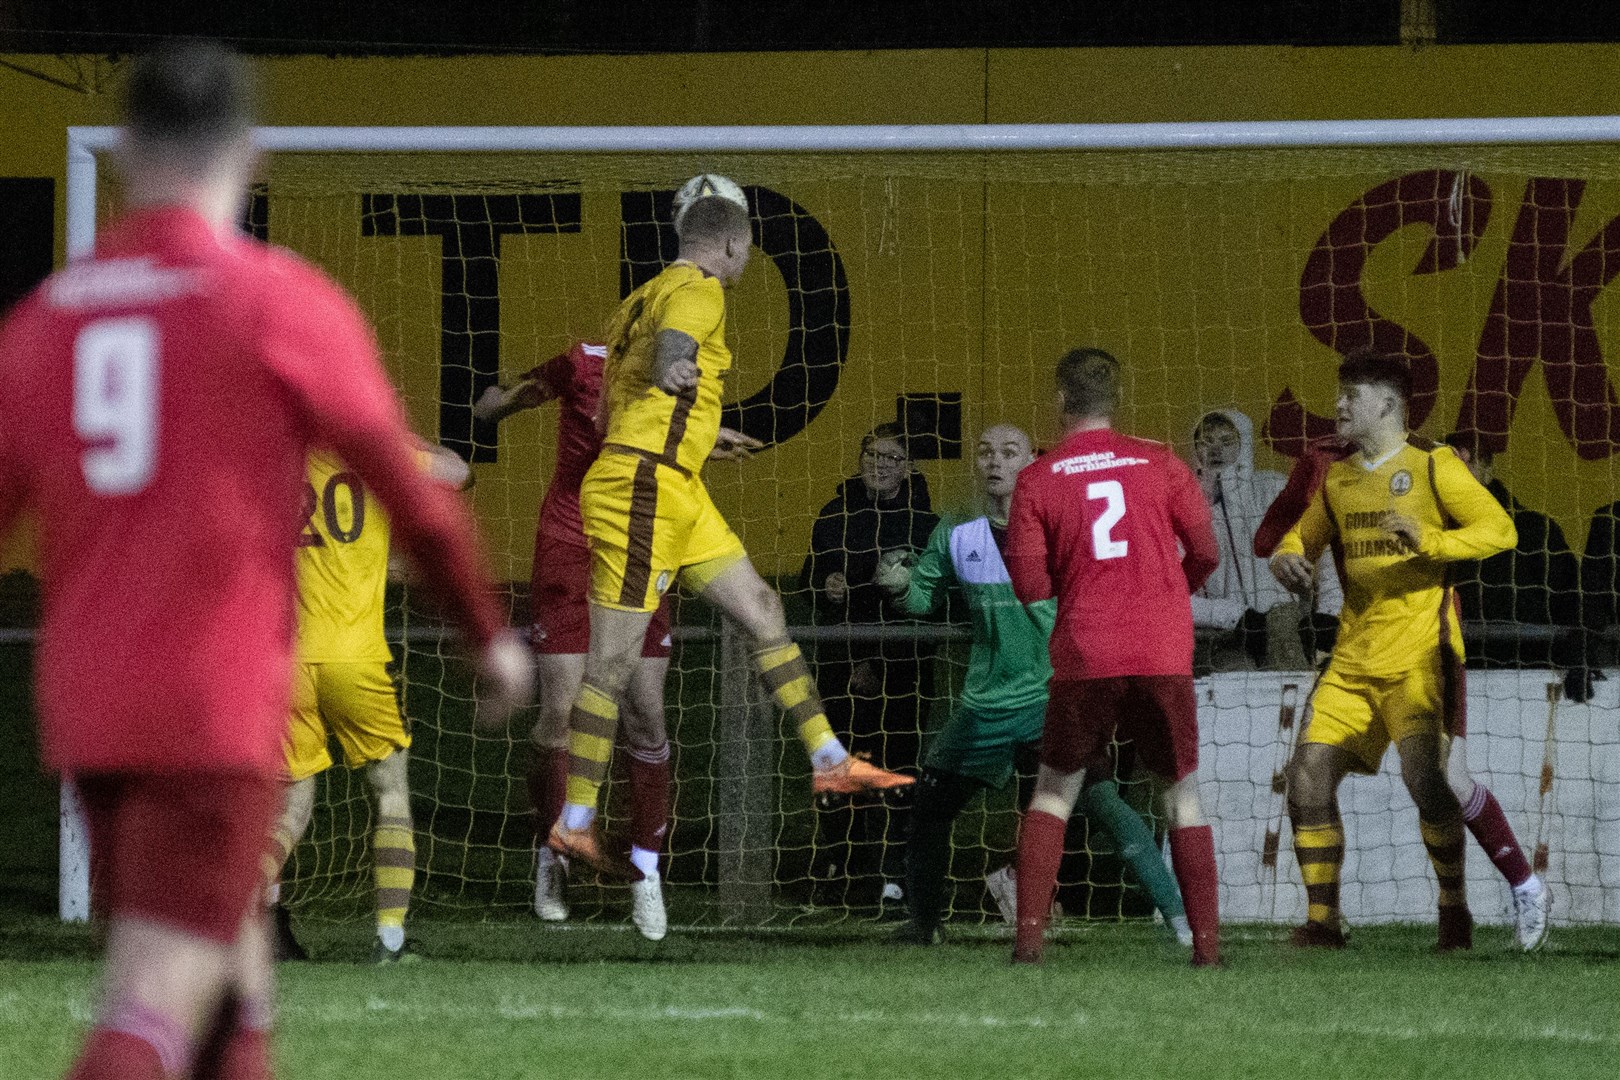 Forres' Lee Fraser rises up to head home the only goal of the game. ..Forres Mechanics FC (1) vs Lossiemouth FC (0) - Highland Fotball League 22/23 - Mosset Park, Forres 23/12/22...Picture: Daniel Forsyth..